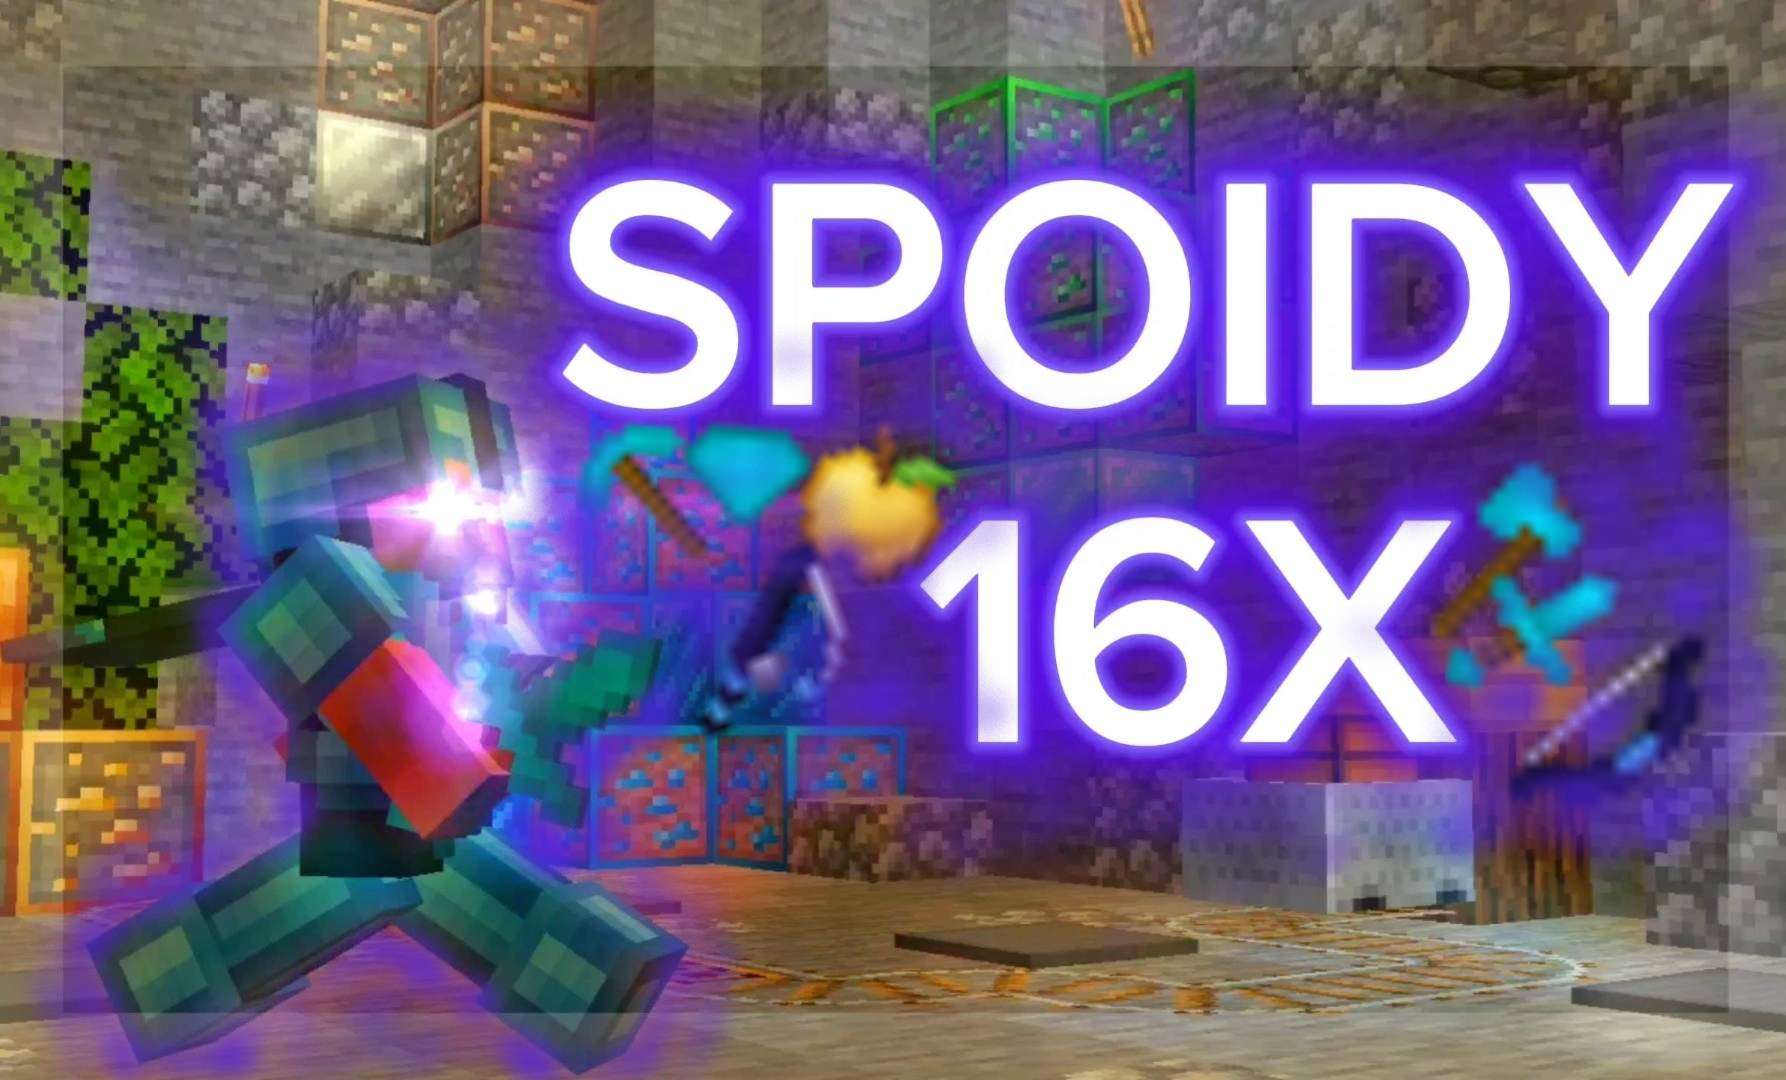 Spoidy 16x 16 by Spoidyyy on PvPRP